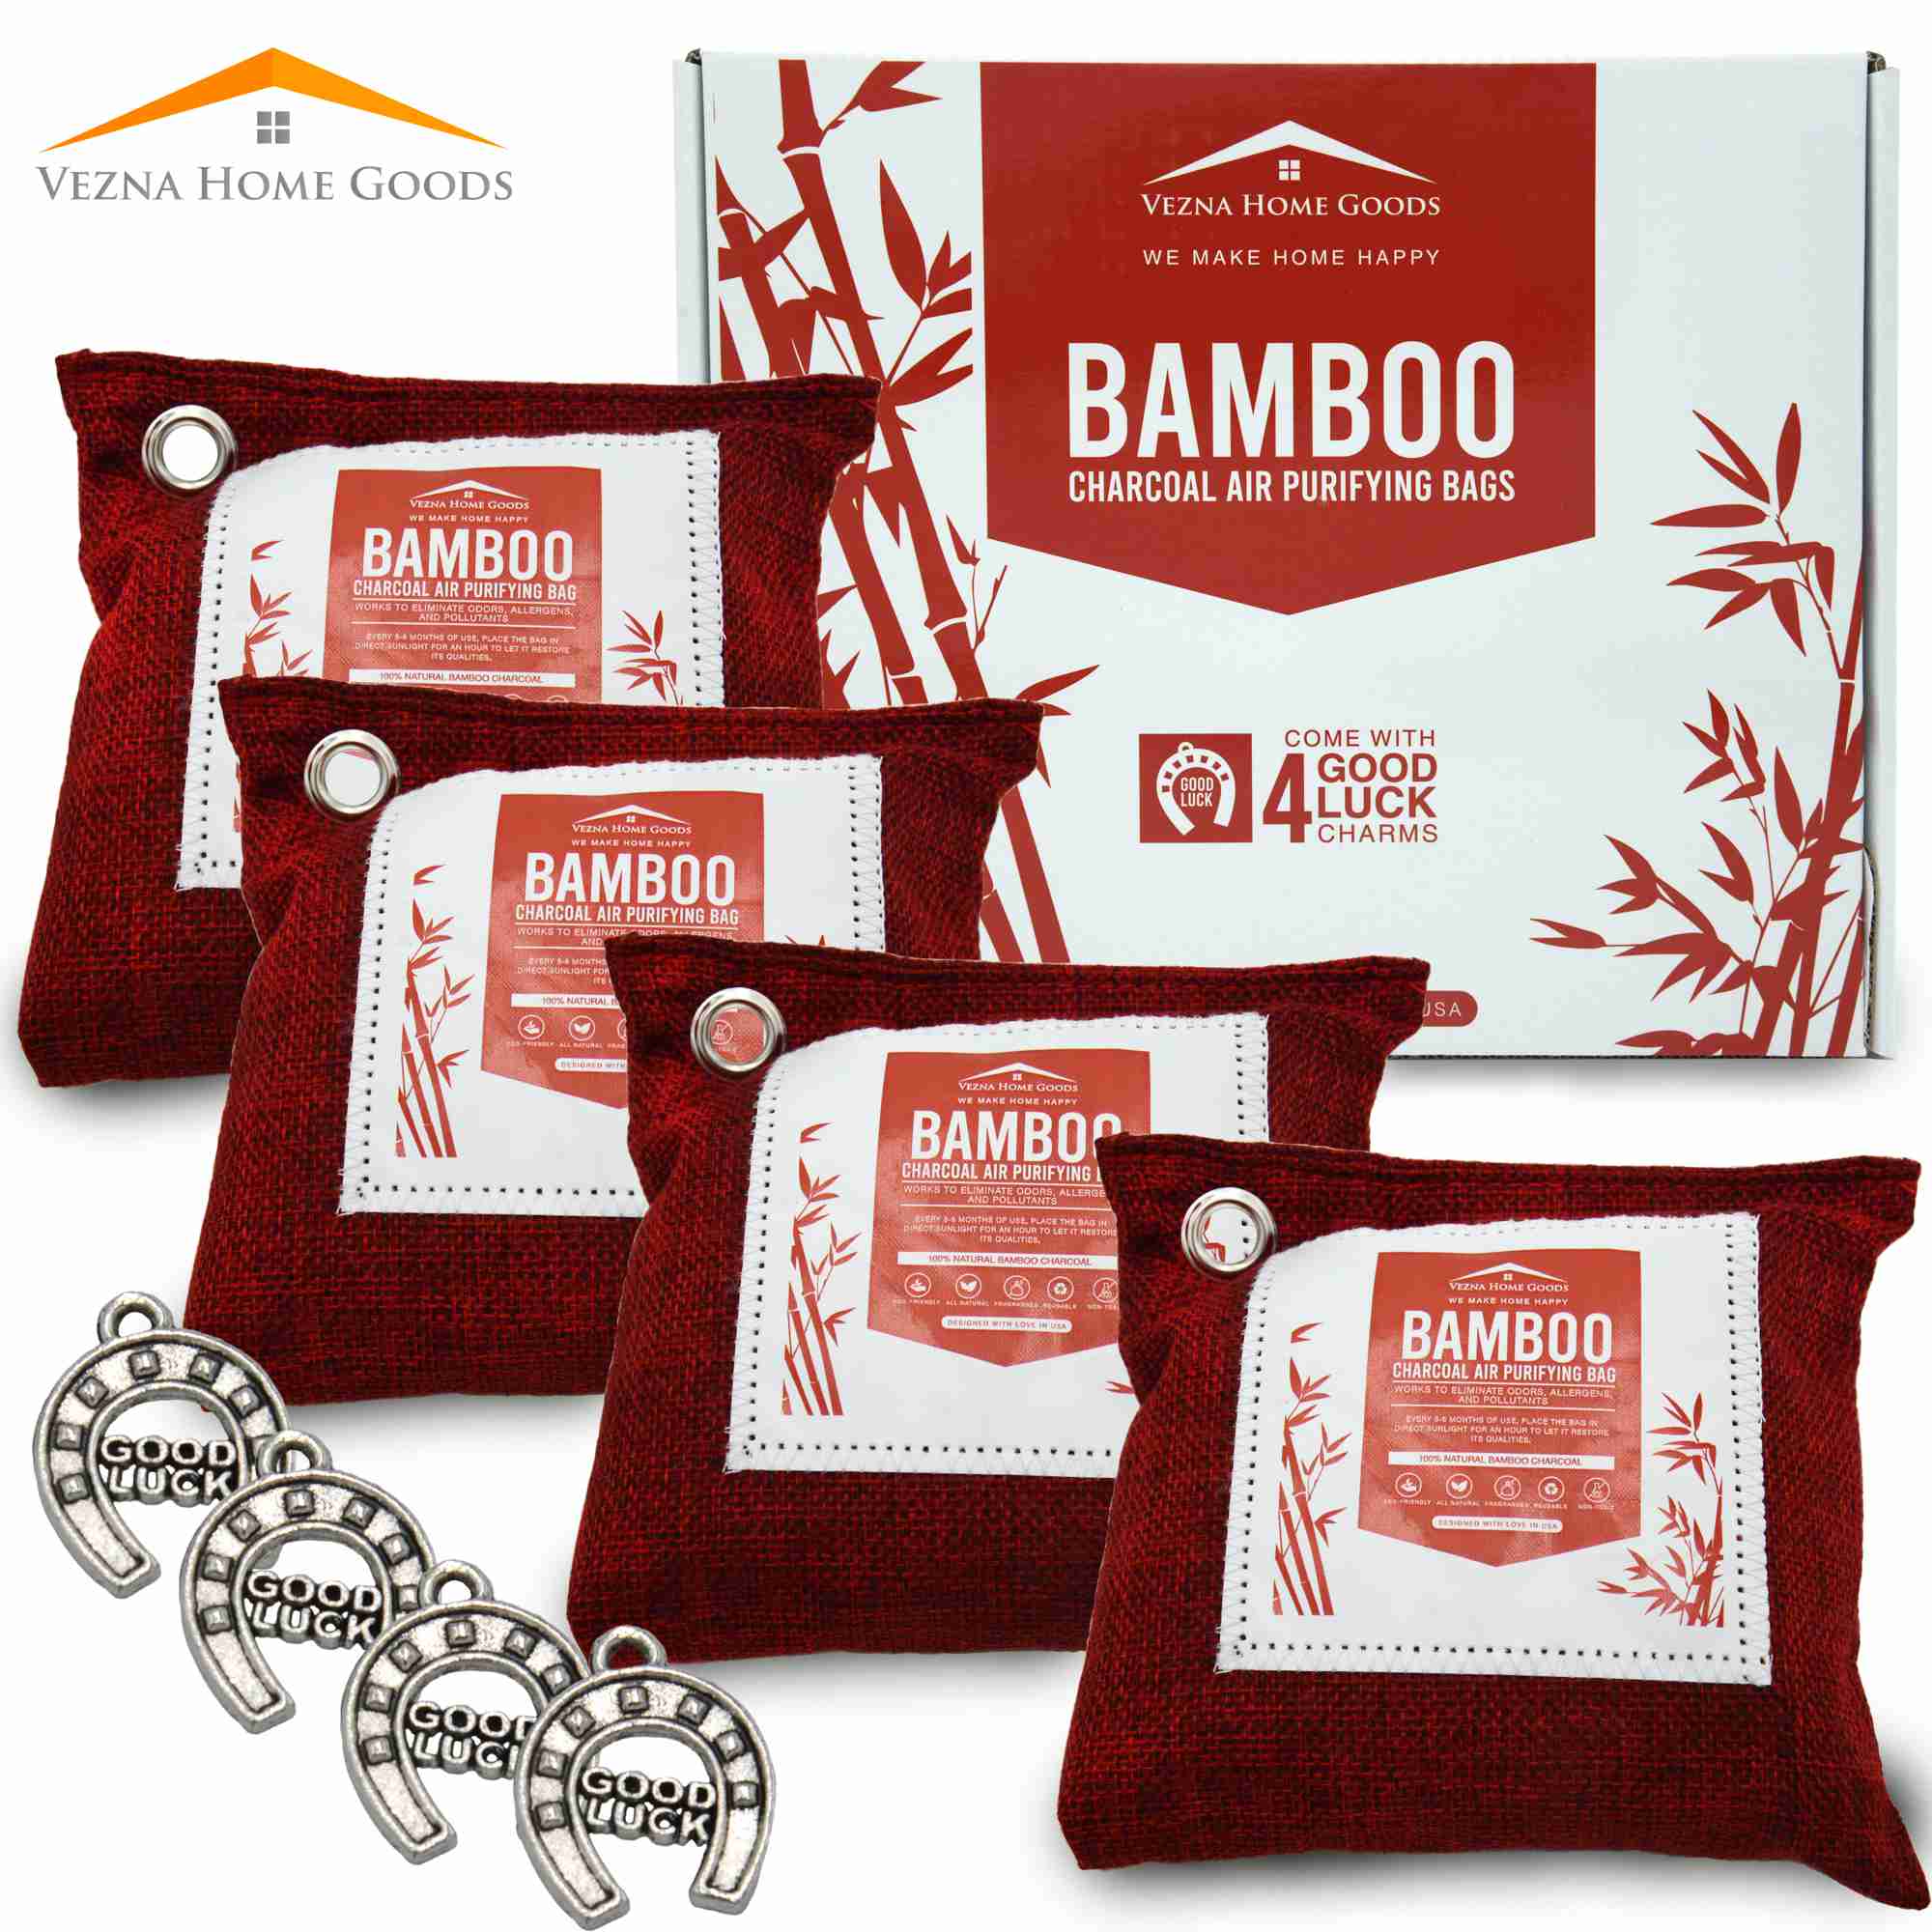 Bamboo-Charcoal-Air-Purifying-Bag with cash back rebate